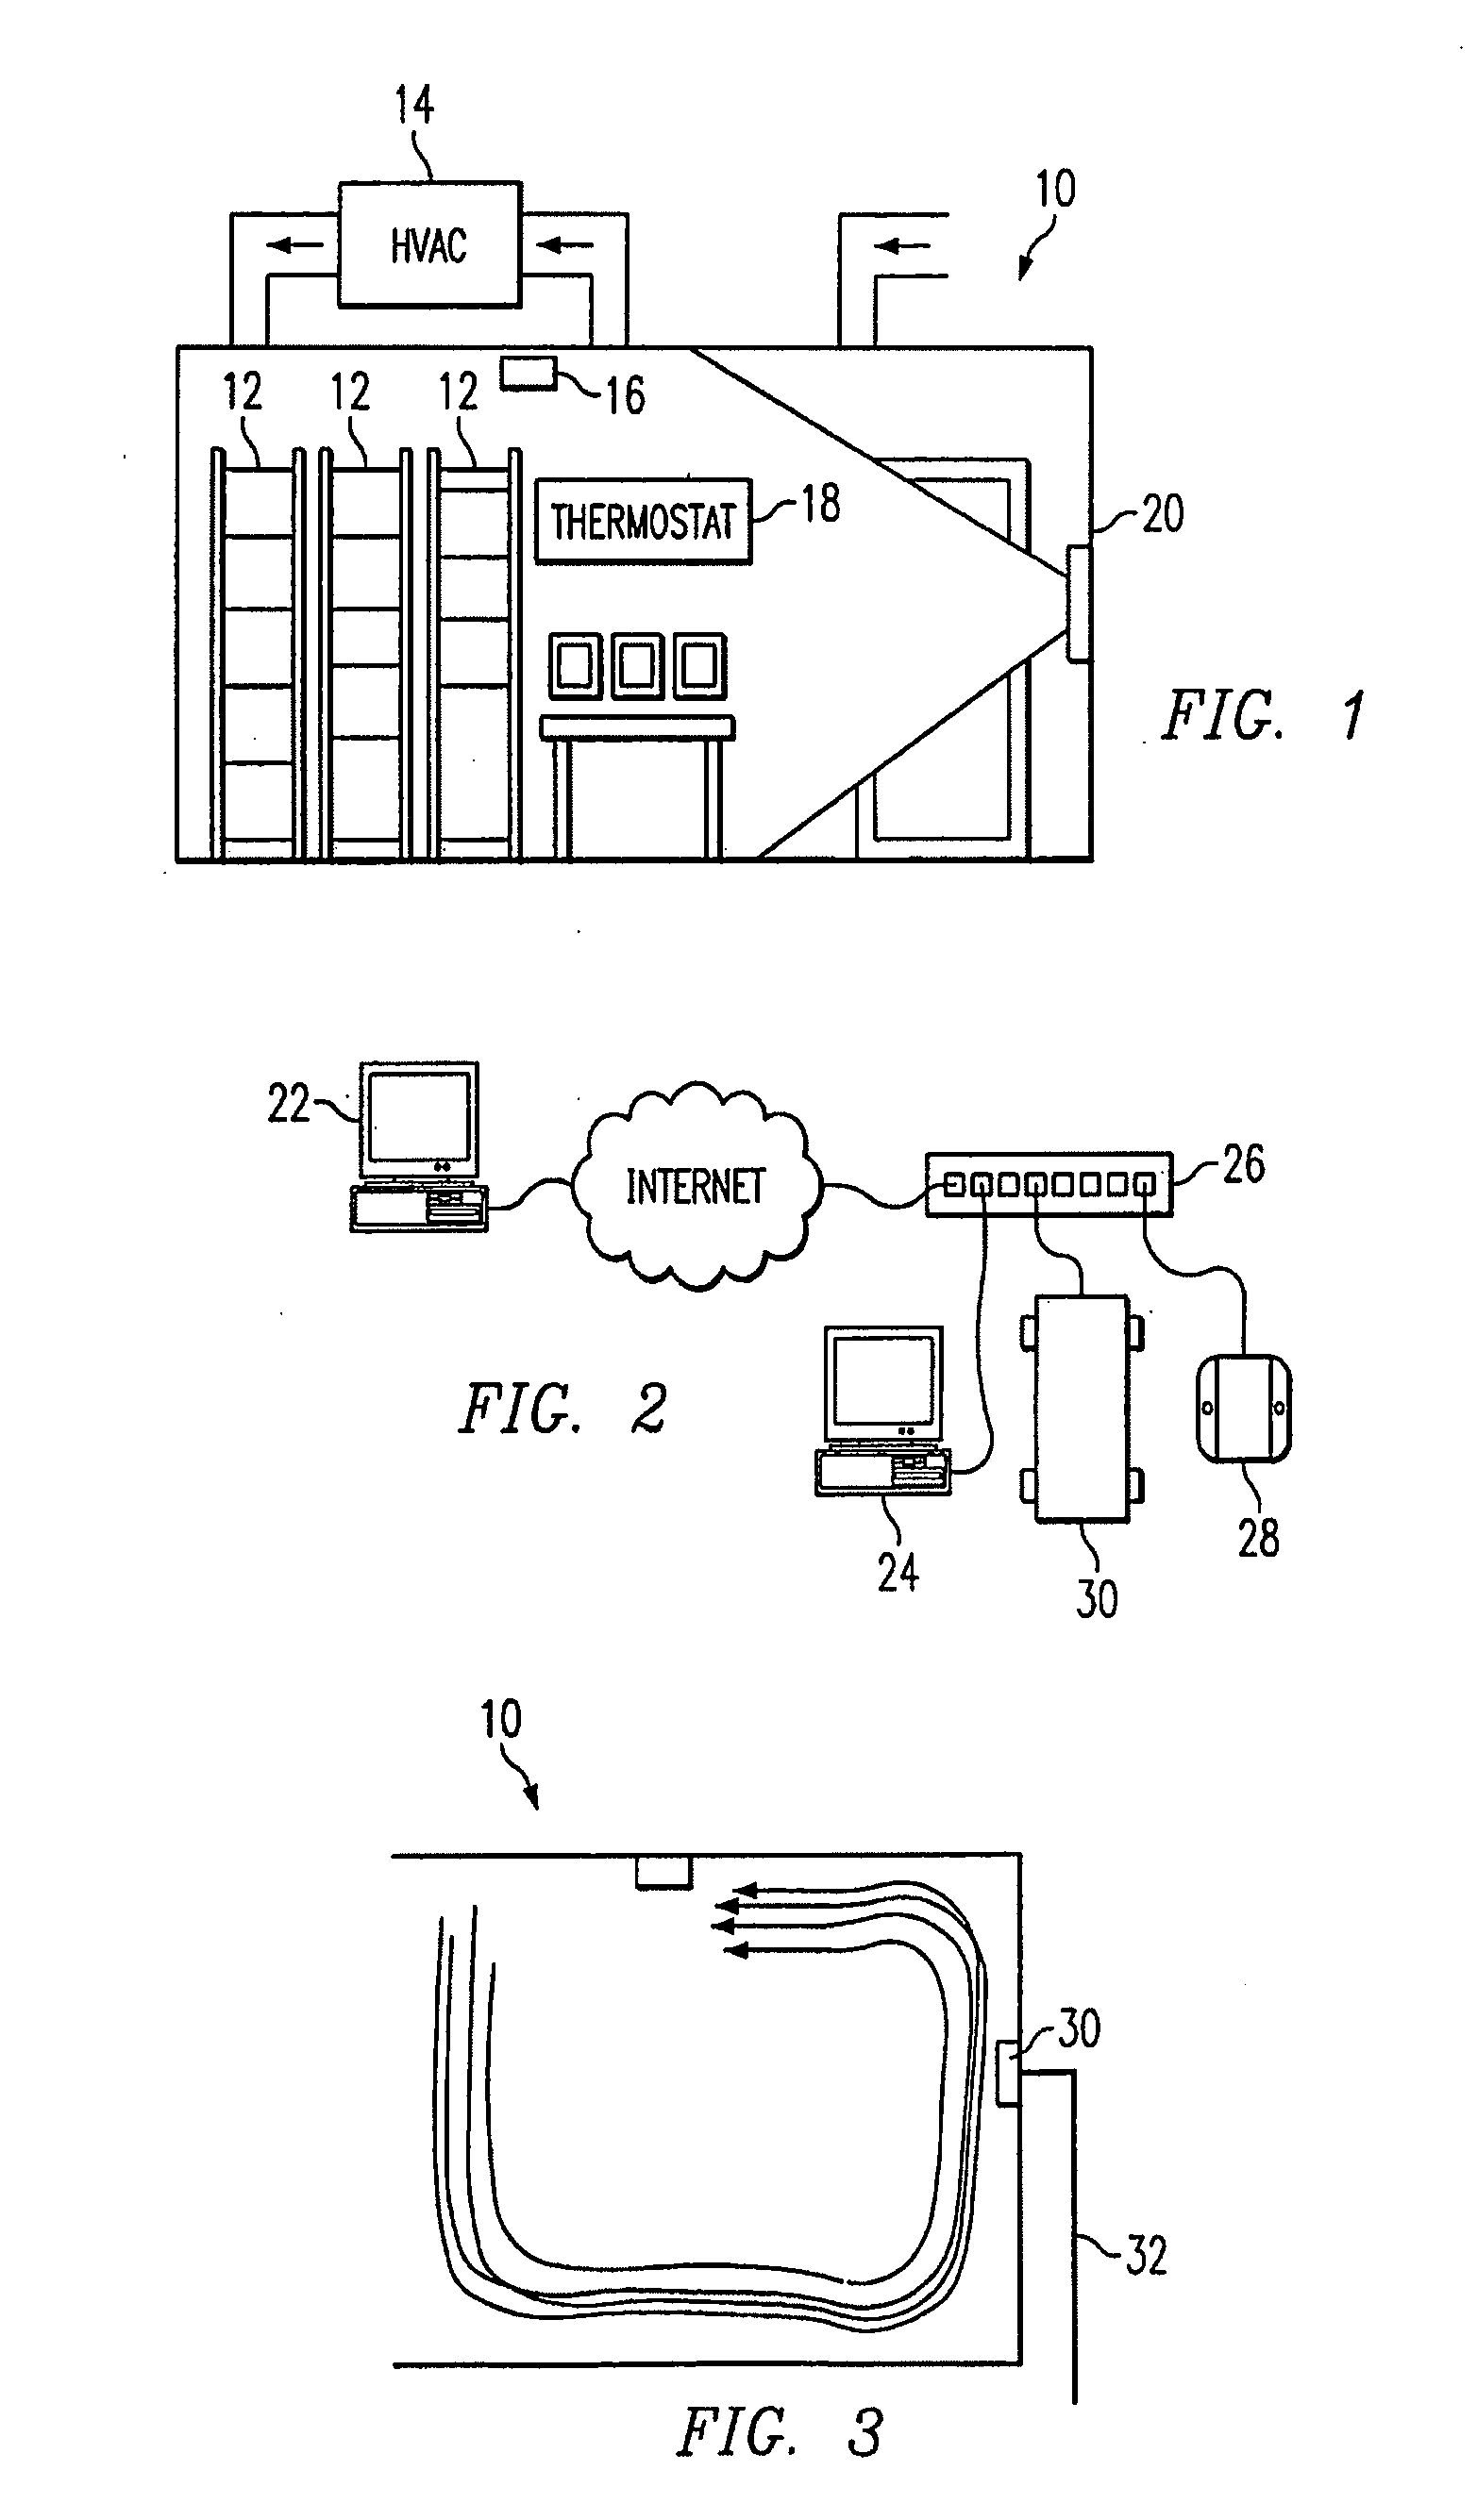 Method and System for Monitoring Computer Networks and Equipment